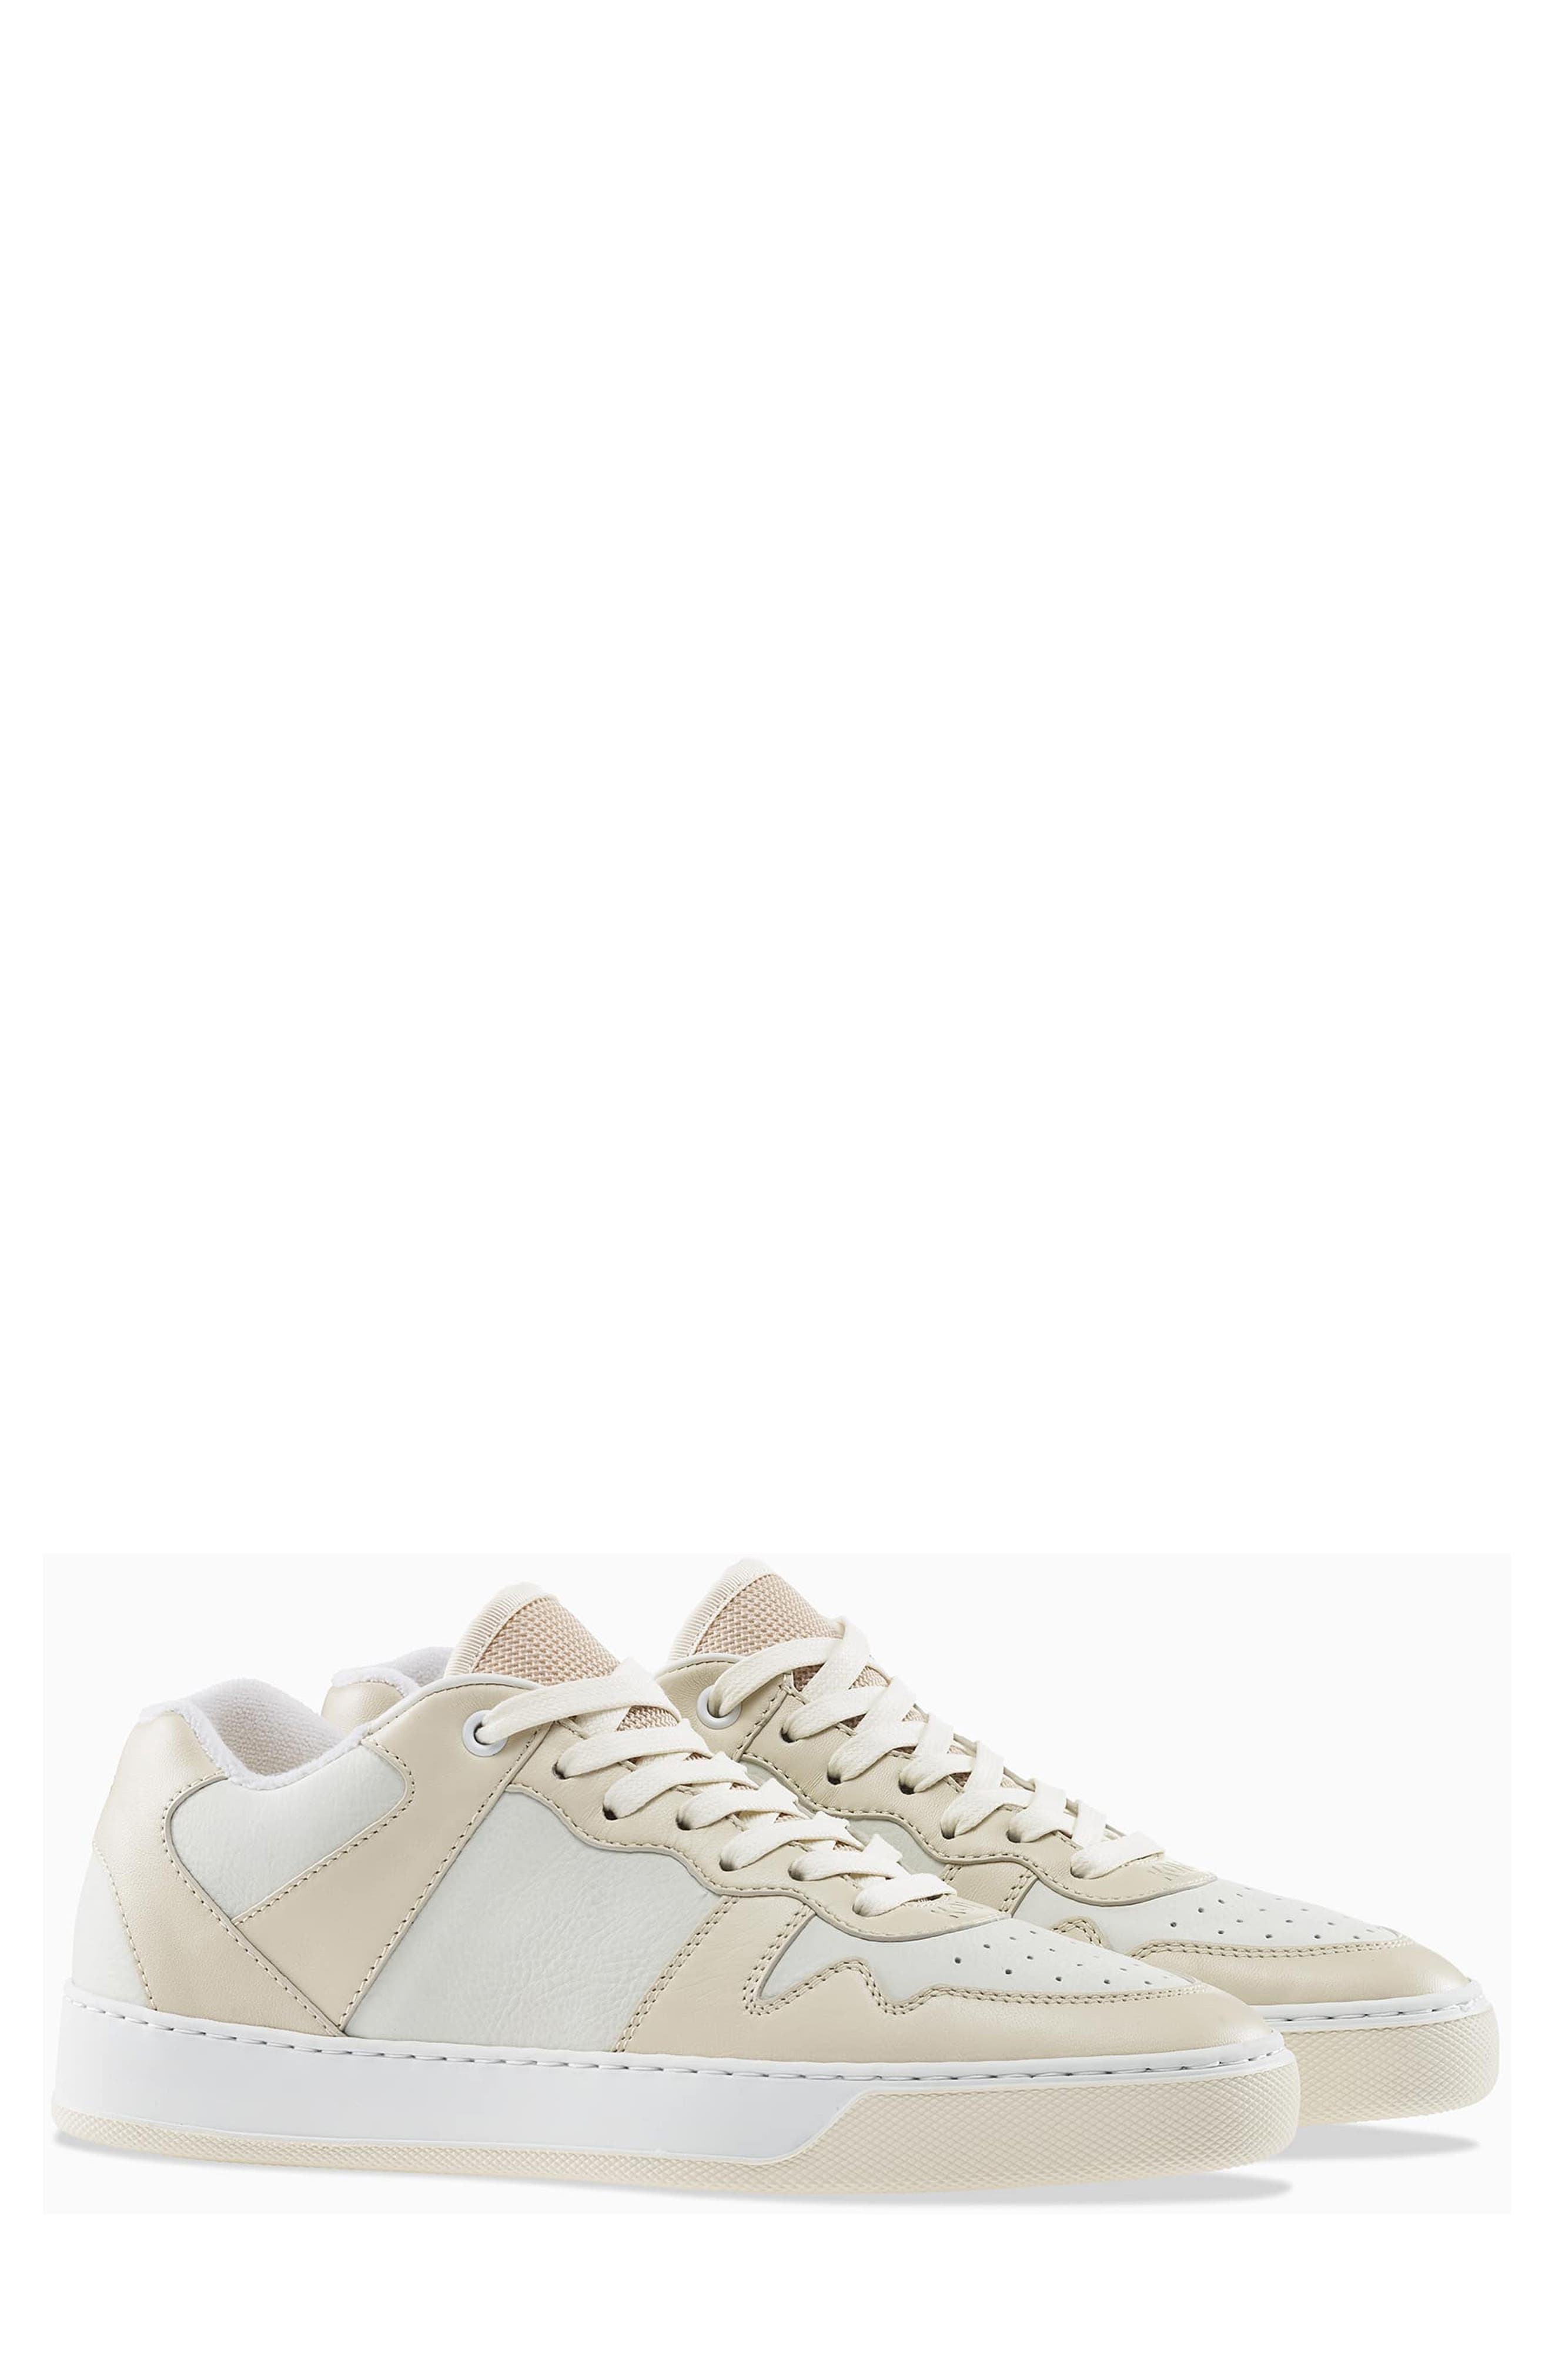 Men's Offwhite Shoes | Nordstrom